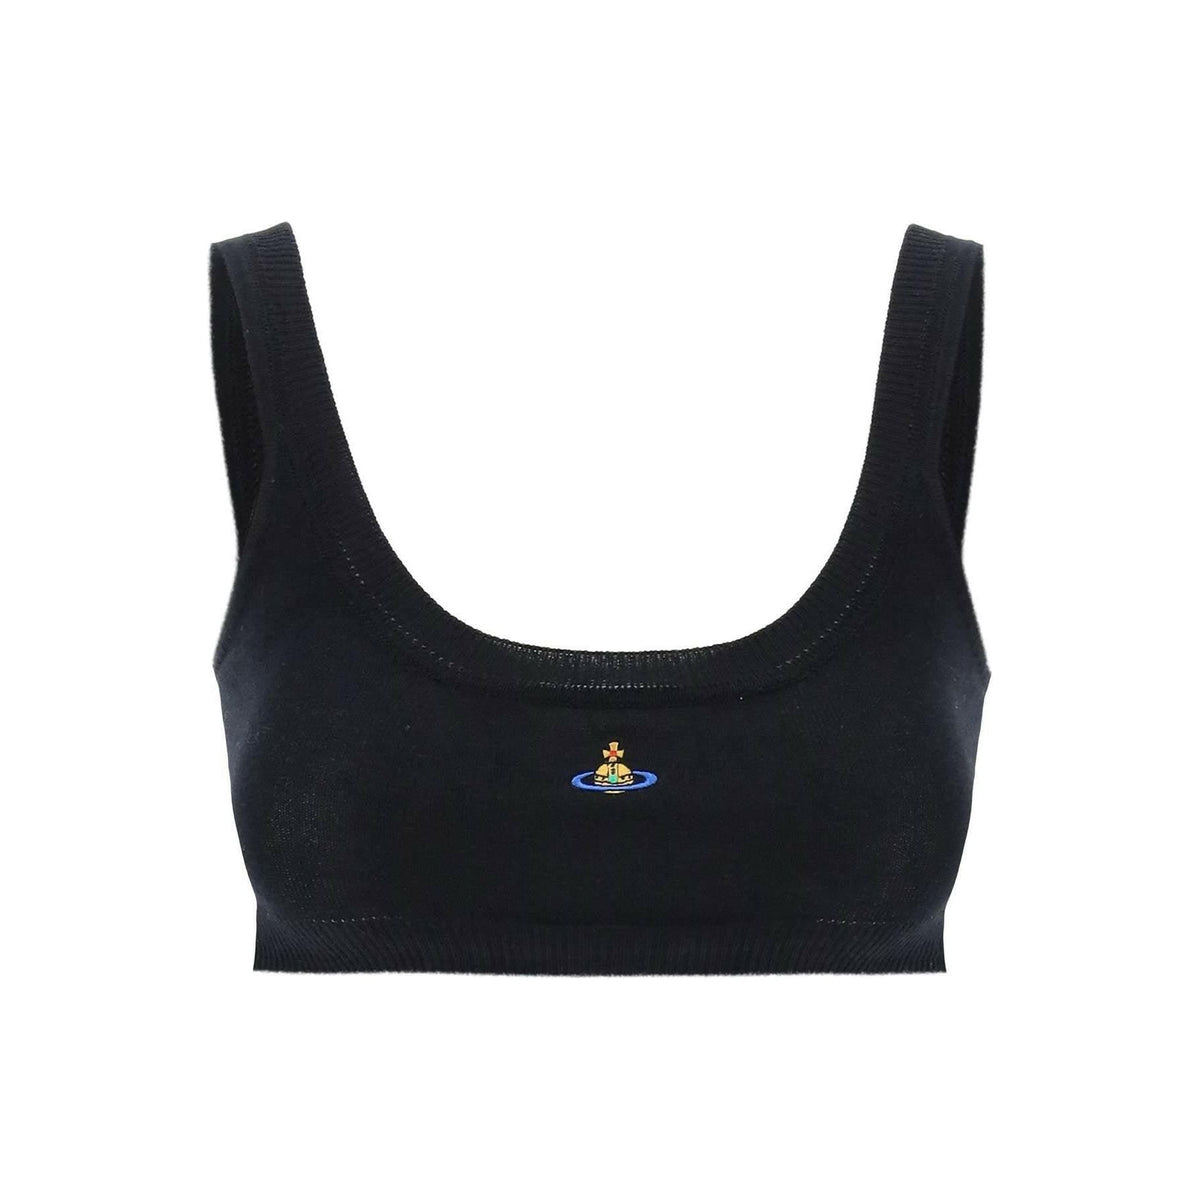 Black Pure Cotton Knit Cropped Bra Top With Orb Embroidery VIVIENNE WESTWOOD JOHN JULIA.